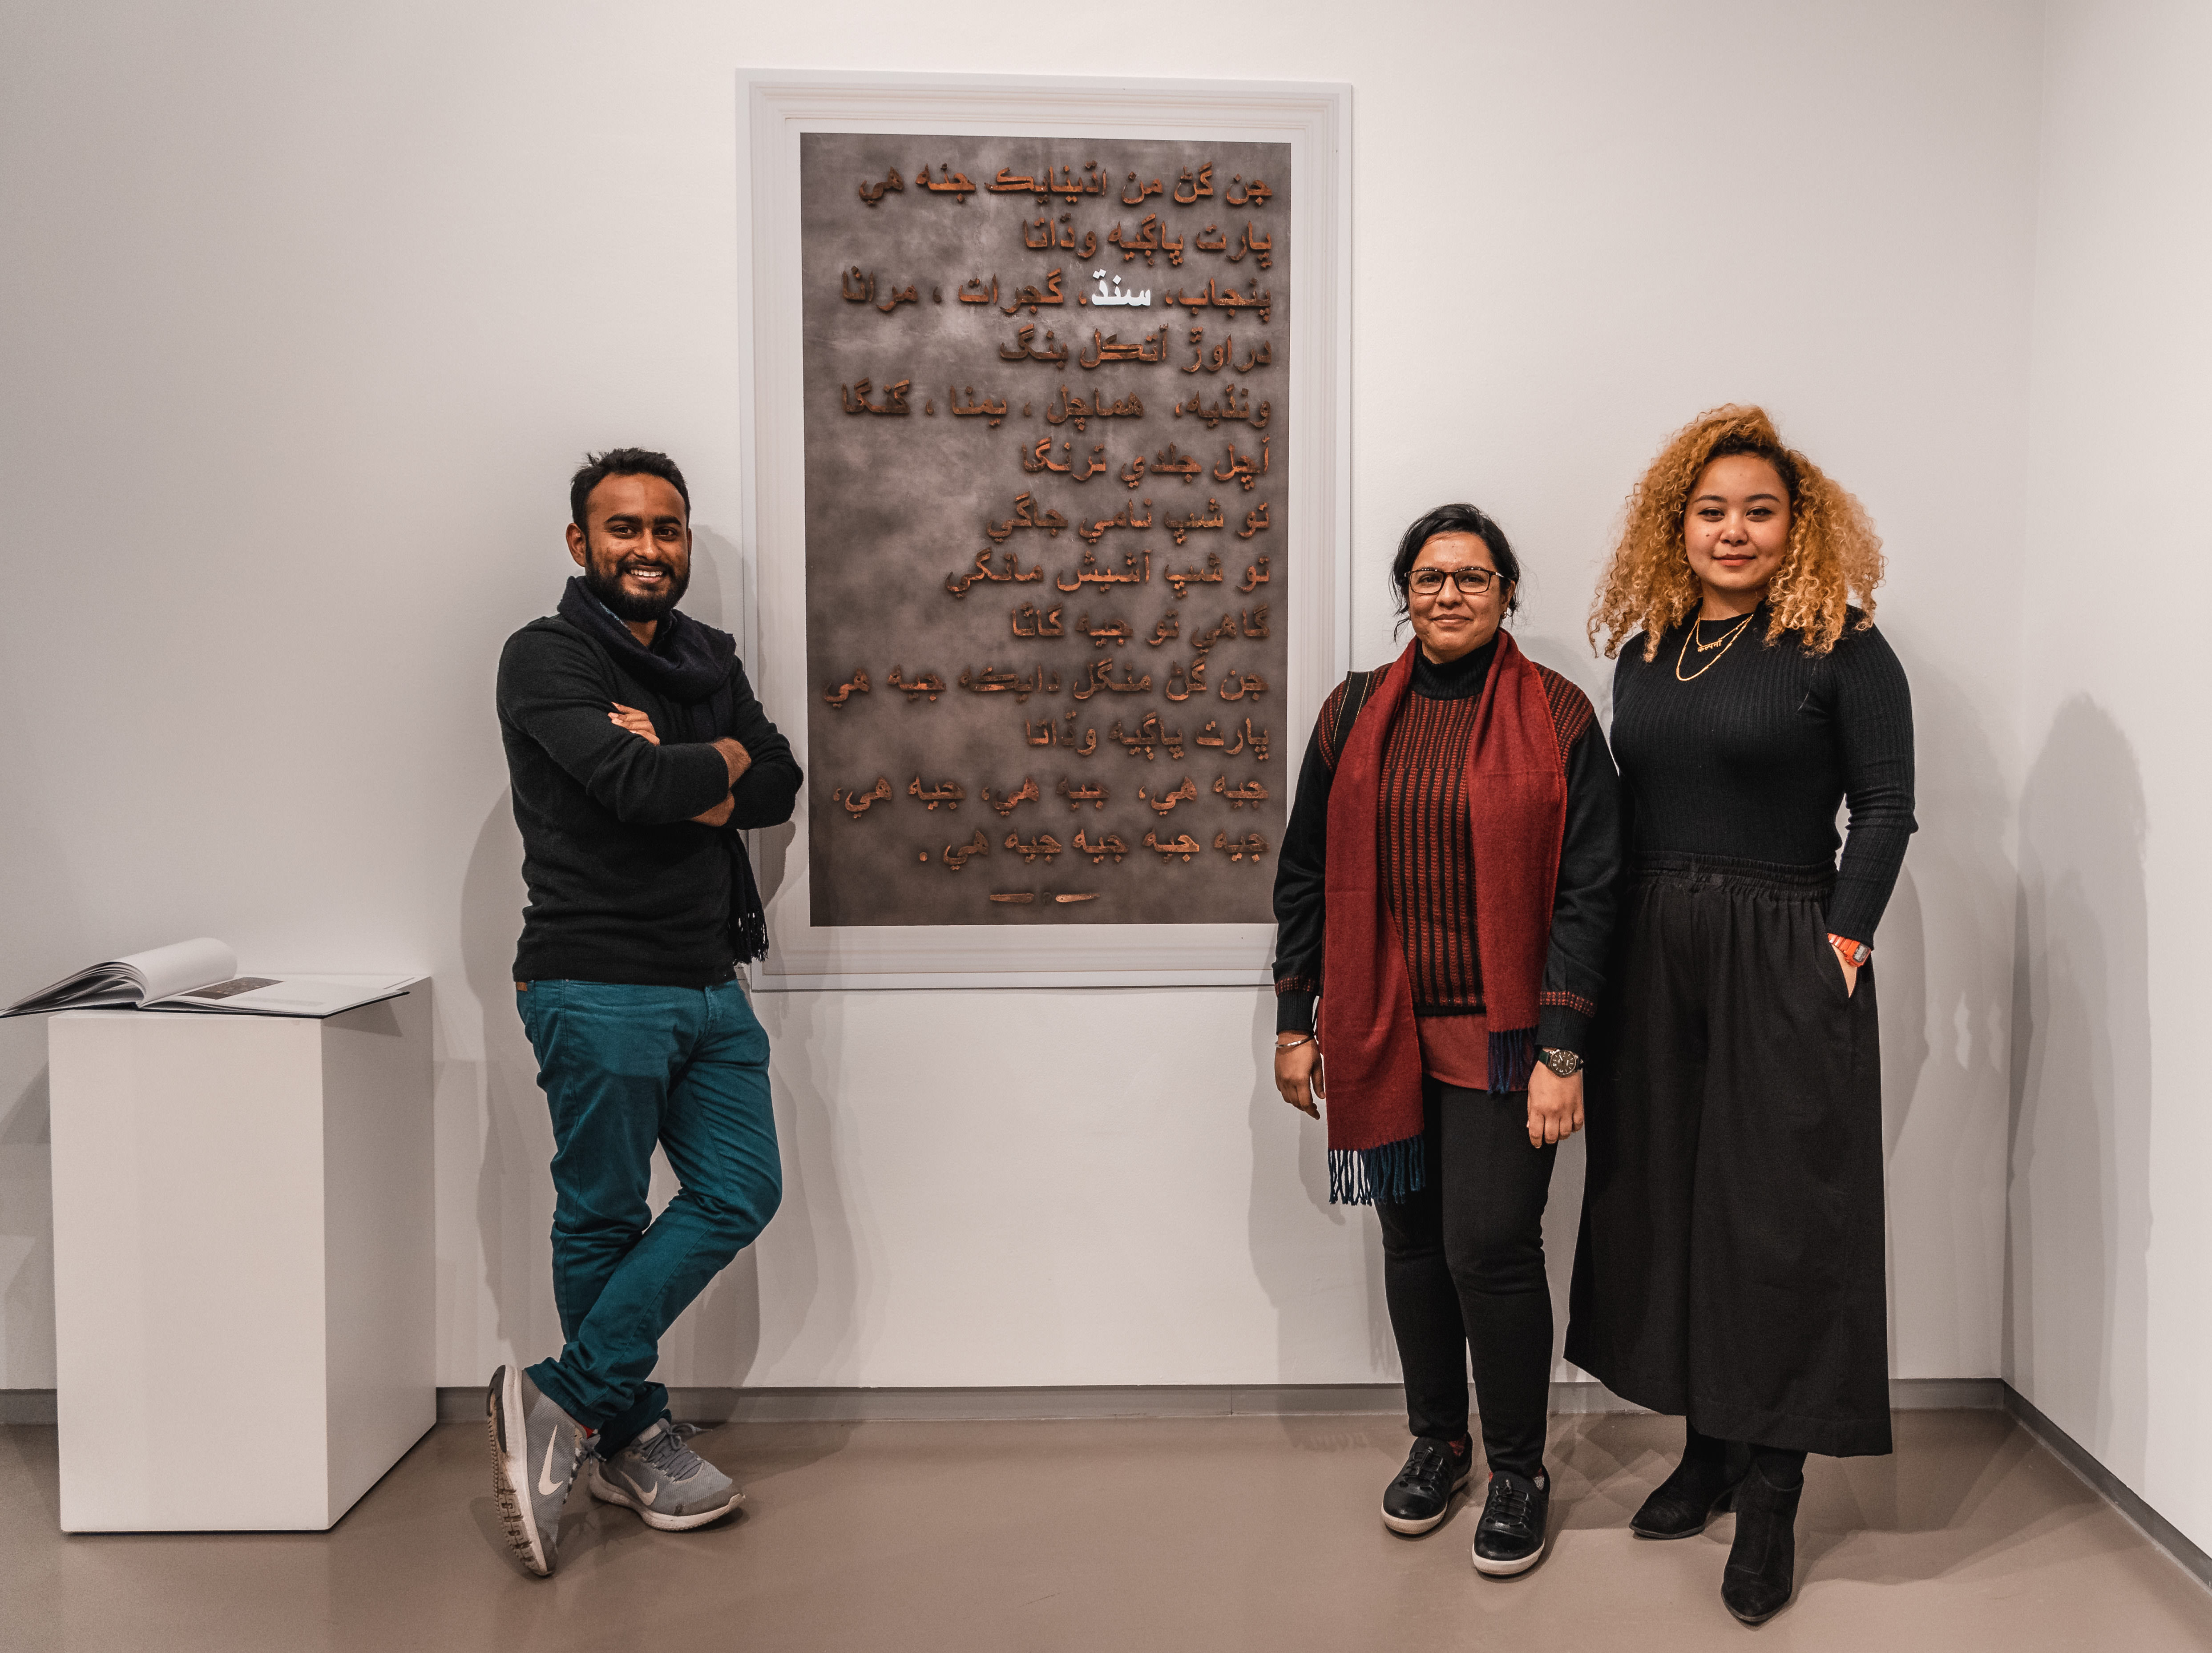 The Spring 2019 Visiting Artist Fellows at their gallery exhibition with Sneha Shrestha (right), the Mittal Institute’s Arts Program Manager.